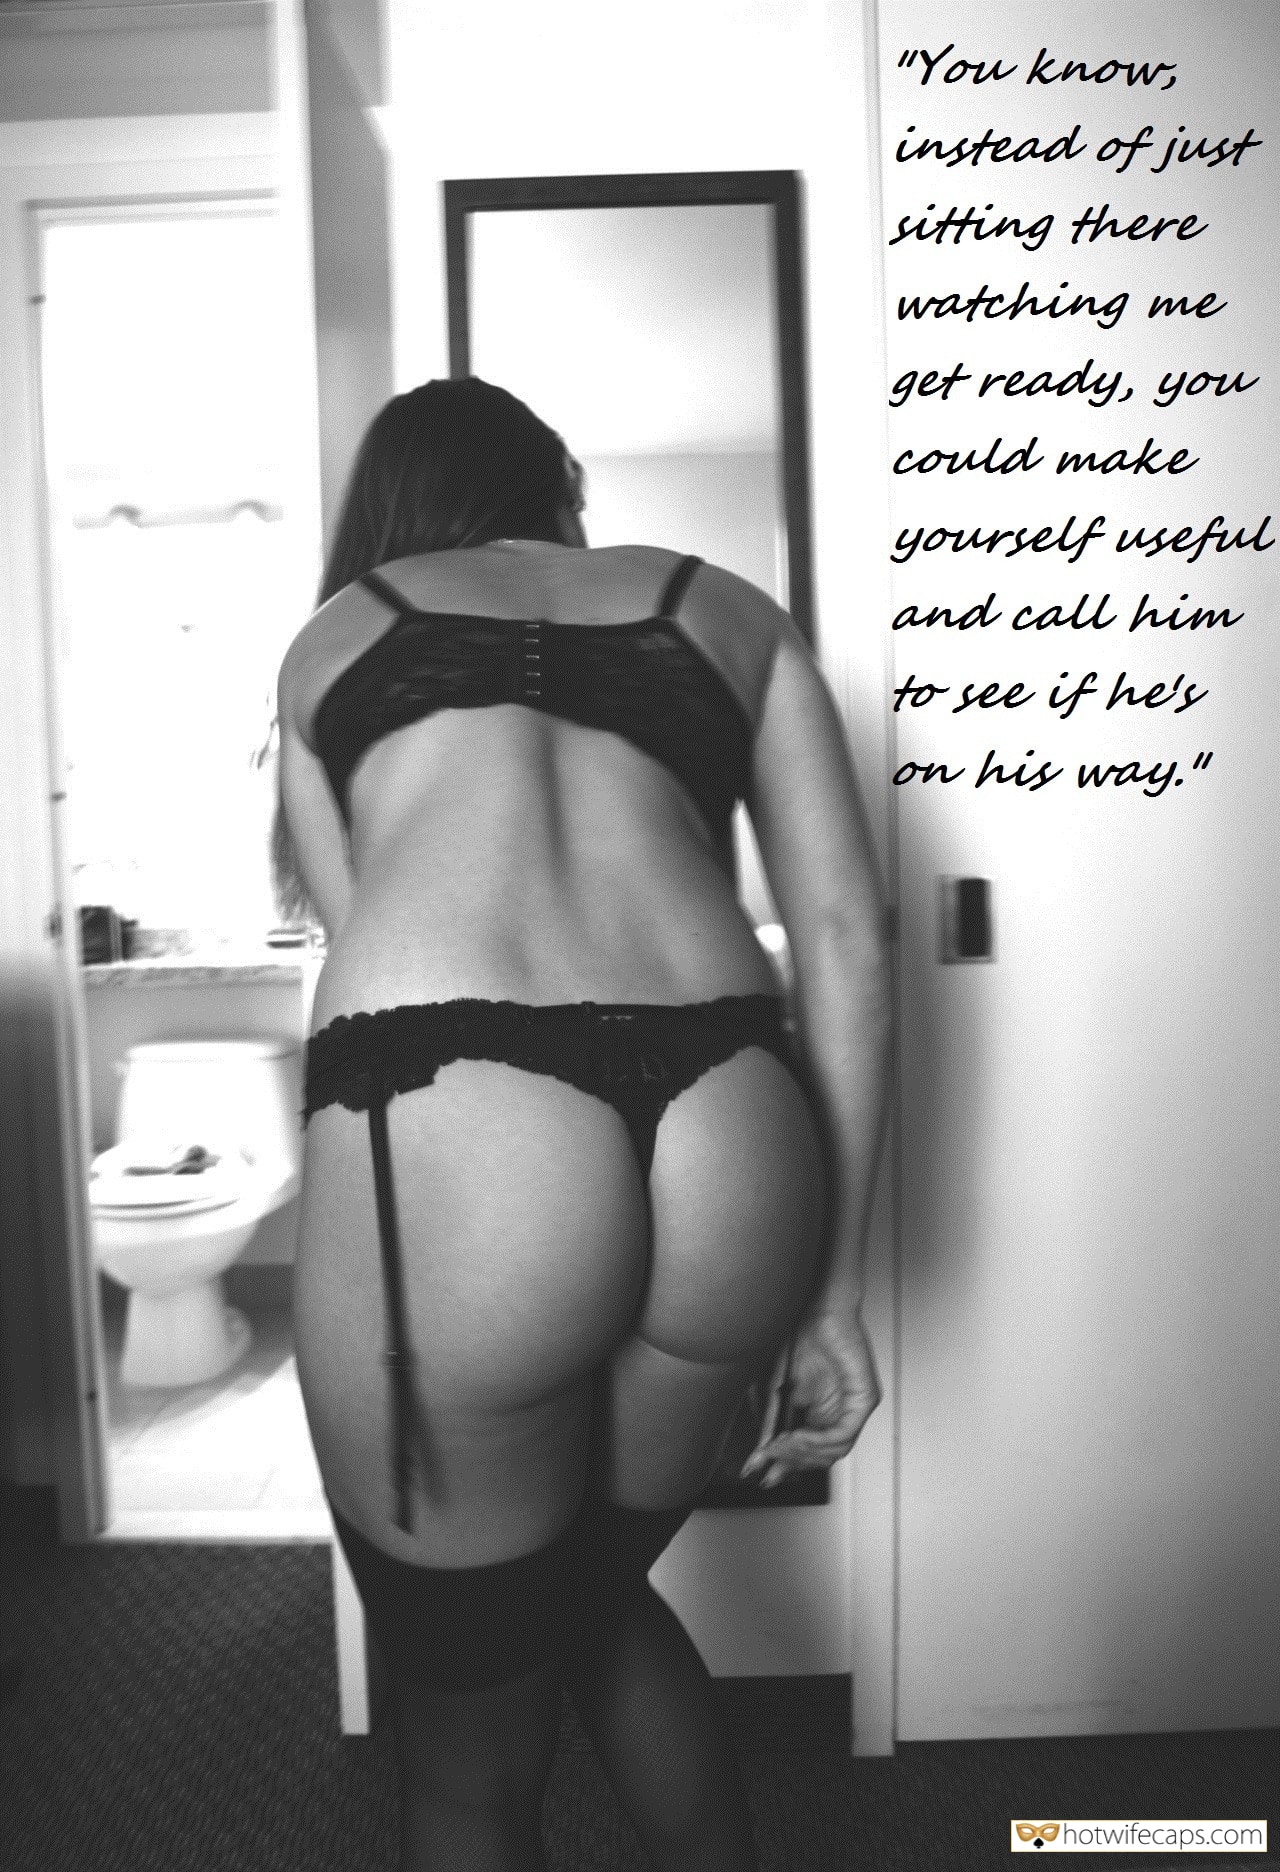 My Favorite hotwife caption: “You know, instead of just sitting there watching me get ready, you could make yourself useful and call him to see if he’s on his way.” Ask Your Bully to Reach ASAP